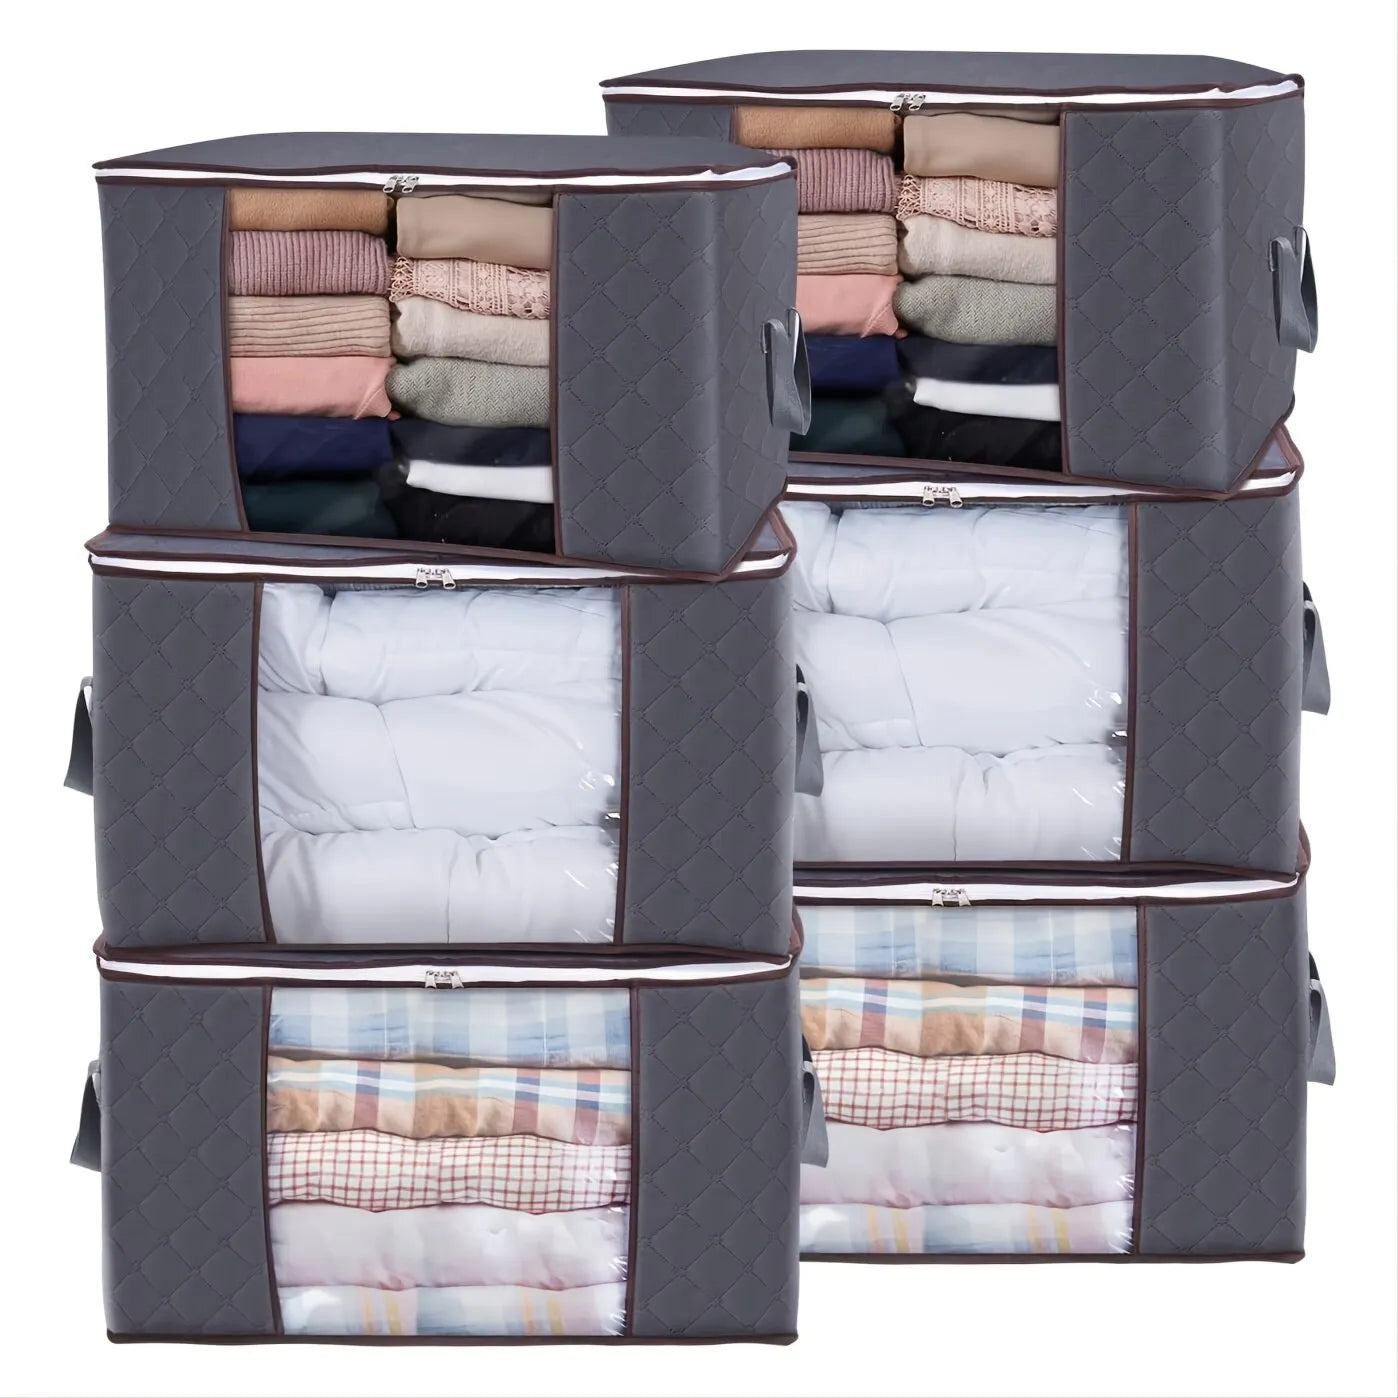 Large Capacity Clothes Storage Bag Organizer With Reinforced Handle For Blanket Comforters Bed Sheets Pillows Toys